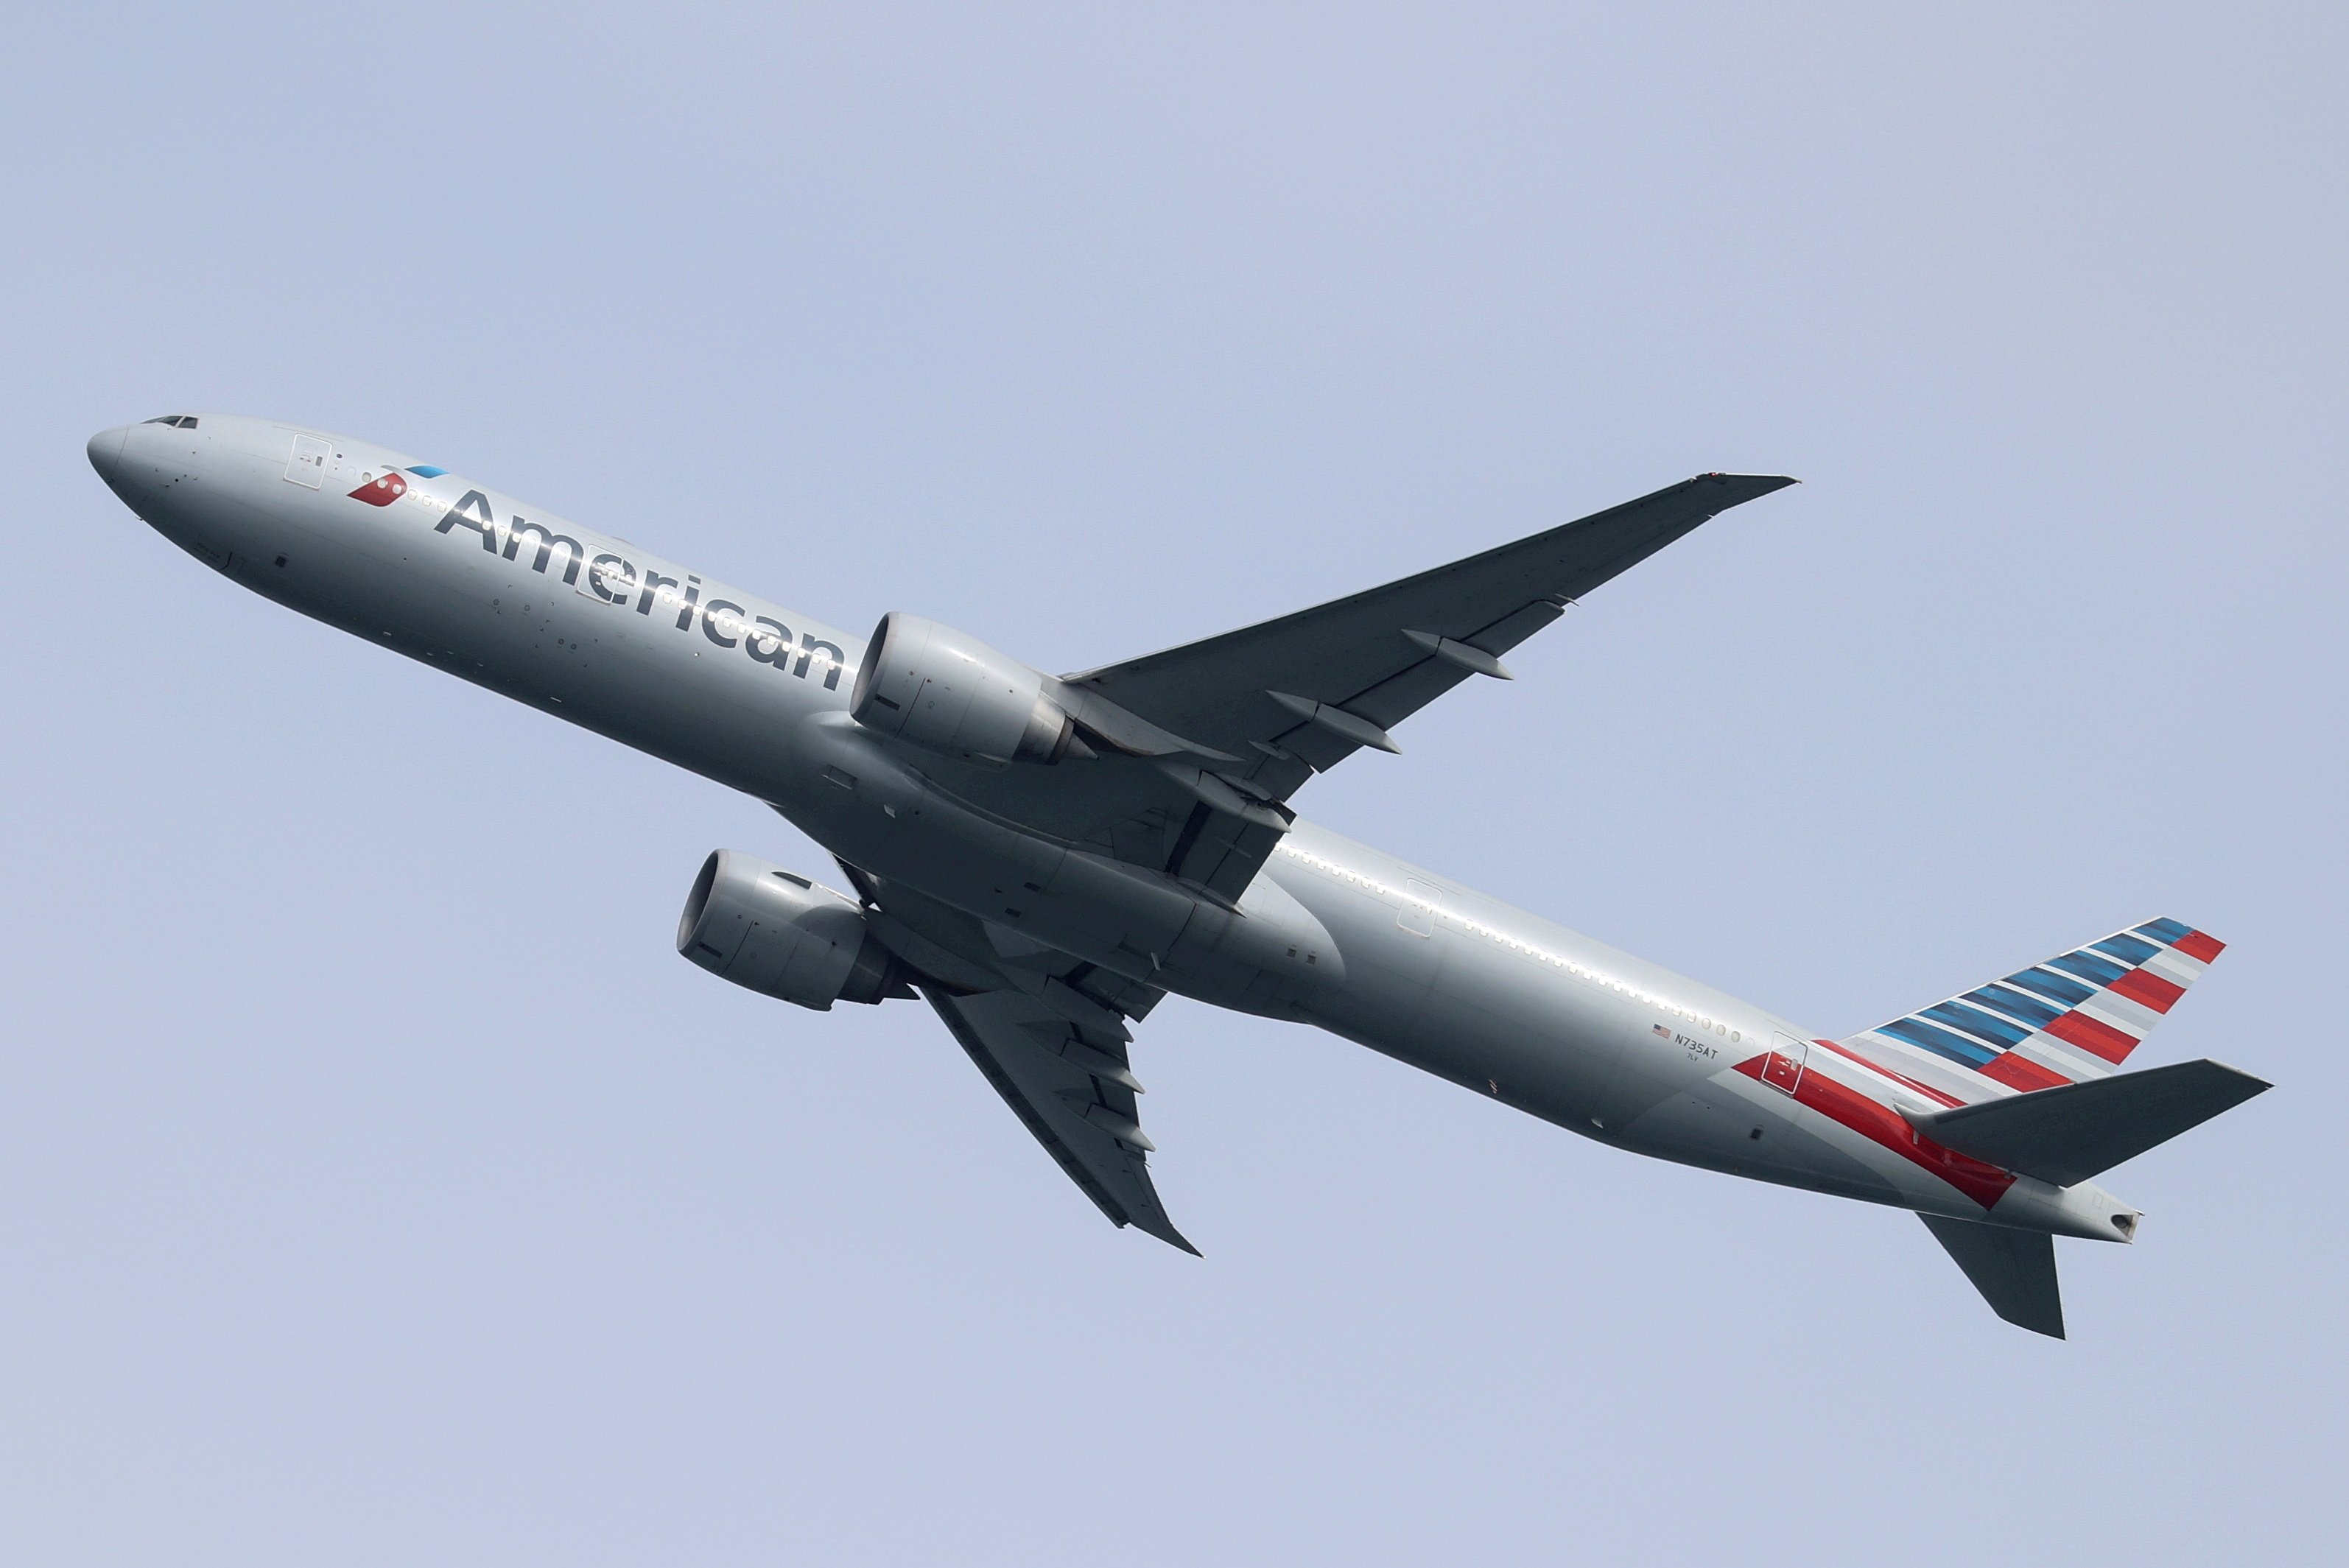 FILE PHOTO: An American Airlines plane takes off from Sydney Airport in Sydney